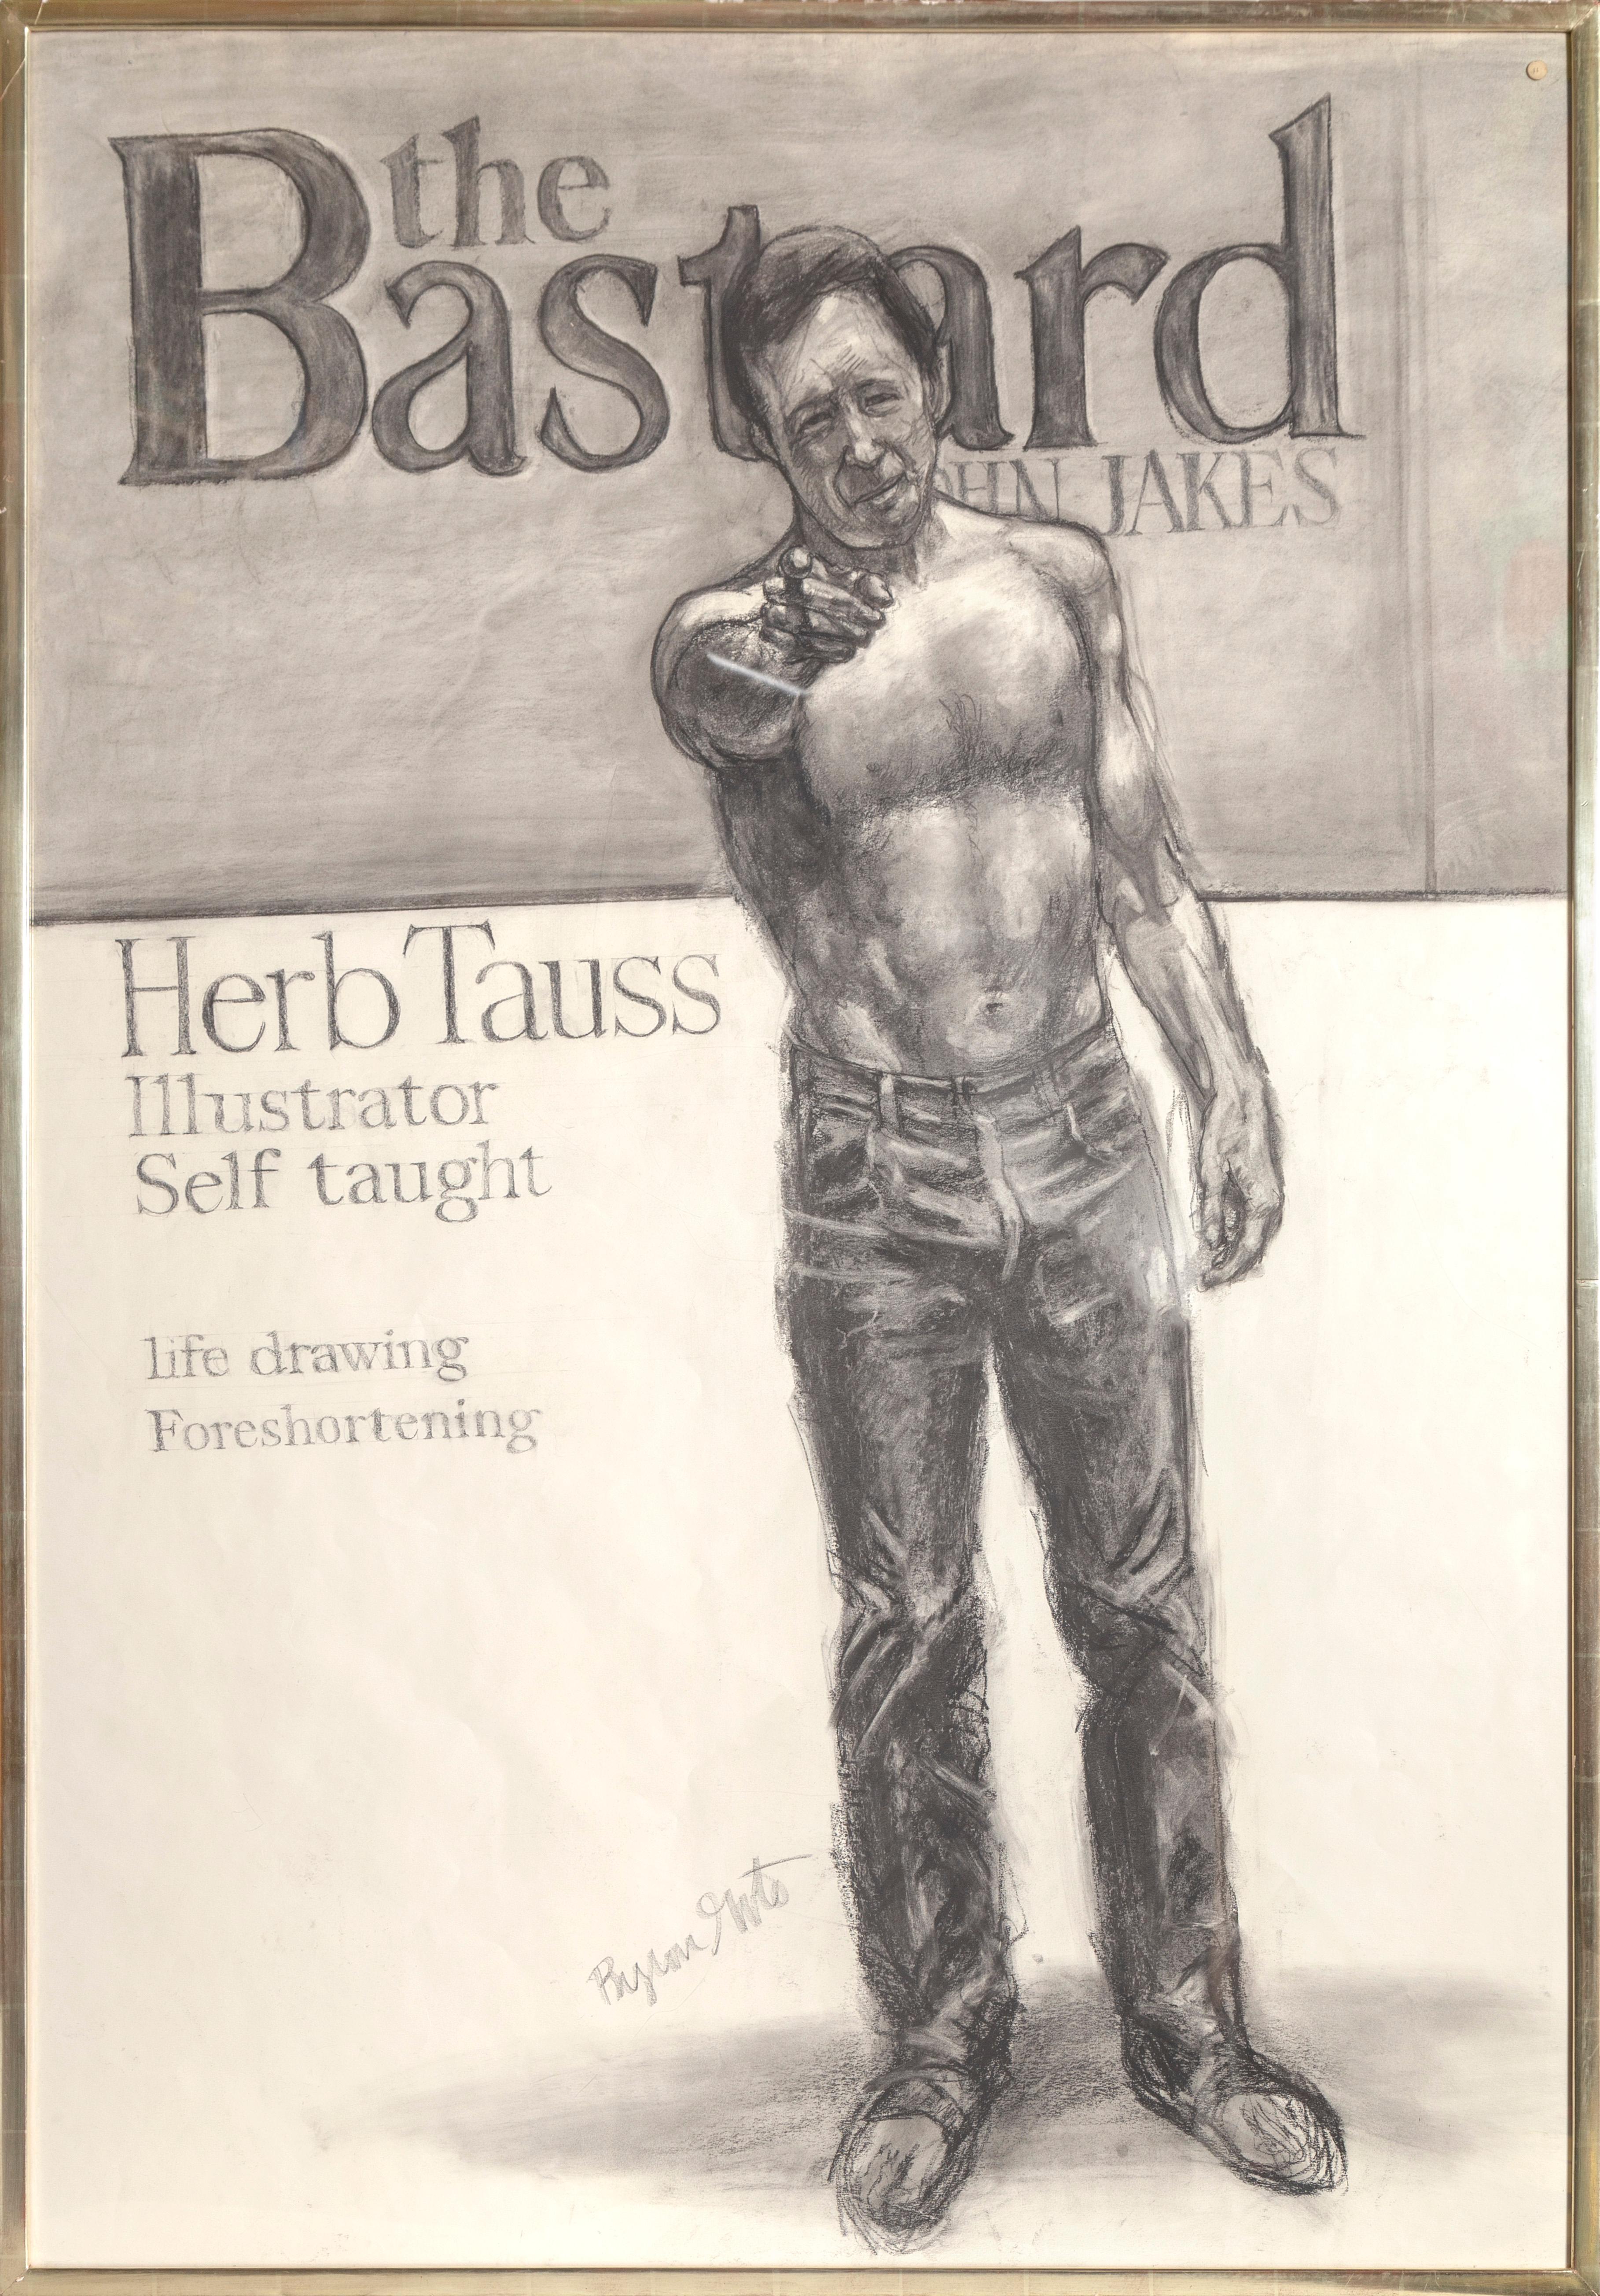 Artist: Byron Goto
Title: Portrait of Herb Tauss
Year: circa 1975
Medium: Charcoal on Paper, signed
Paper Size: 62 x 42 in. (157.48 x 106.68 cm)
Frame Size: 64 x 44 inches